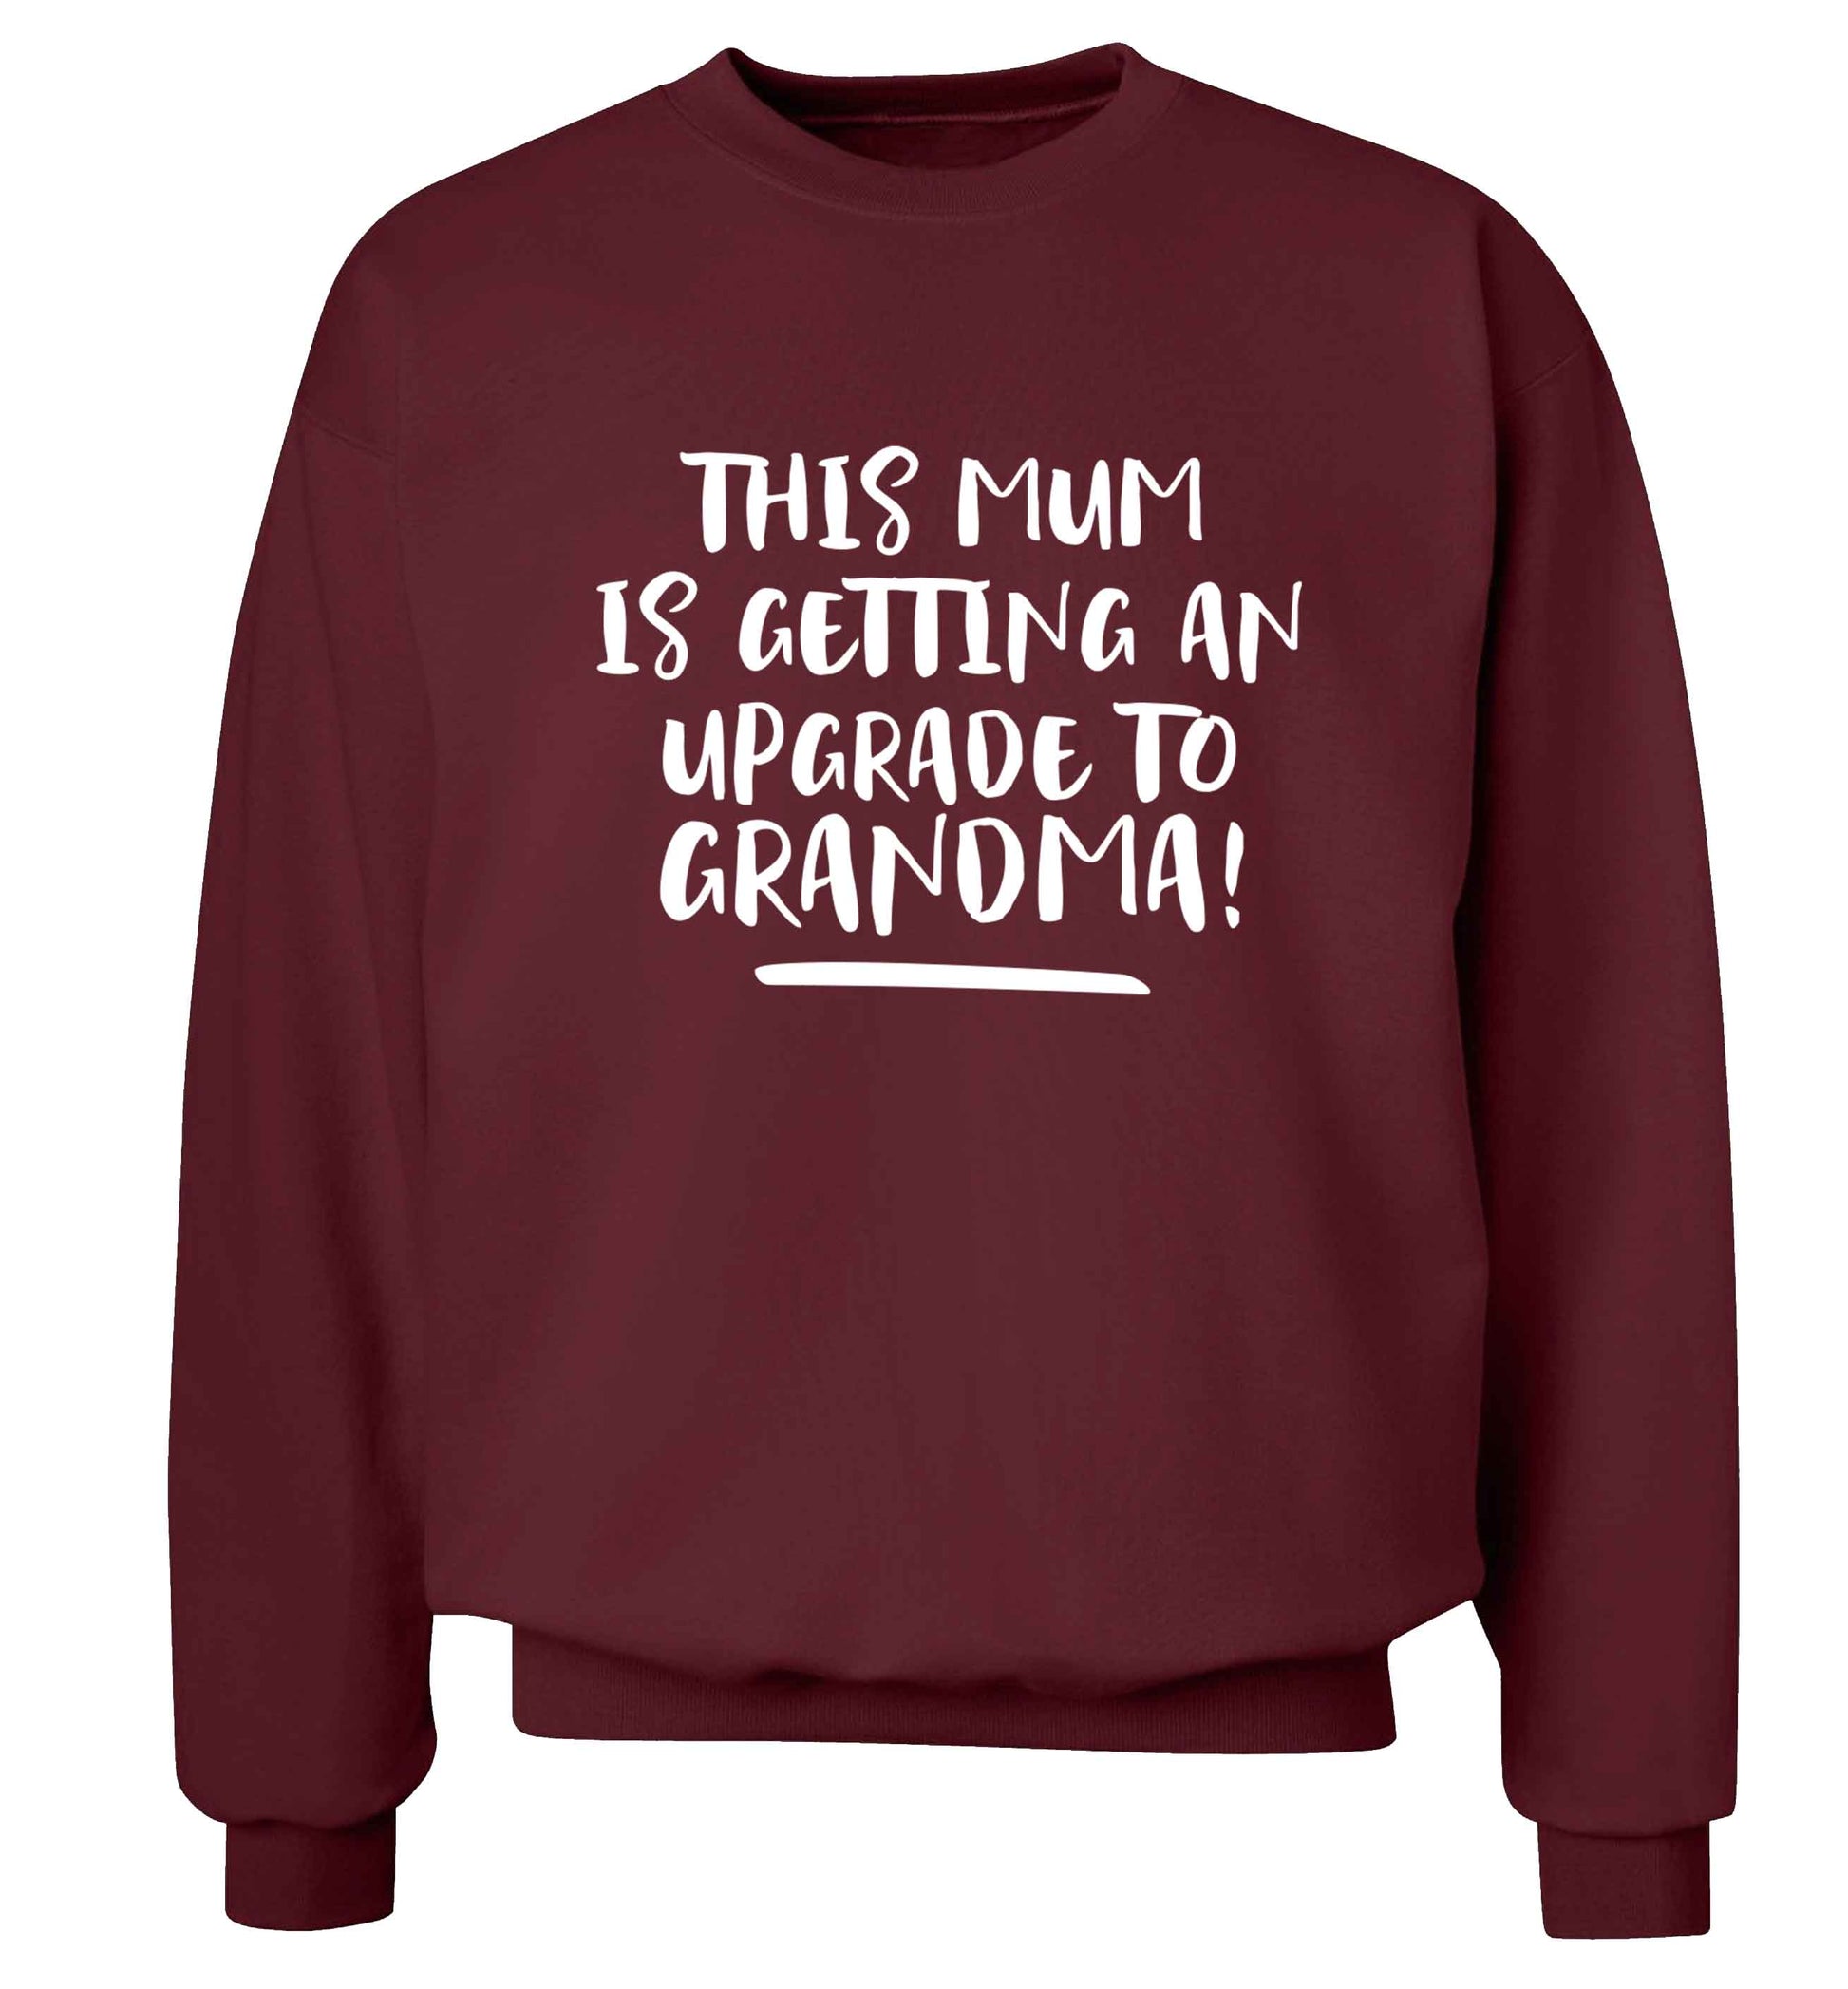 This mum is getting an upgrade to grandma! Adult's unisex maroon Sweater 2XL